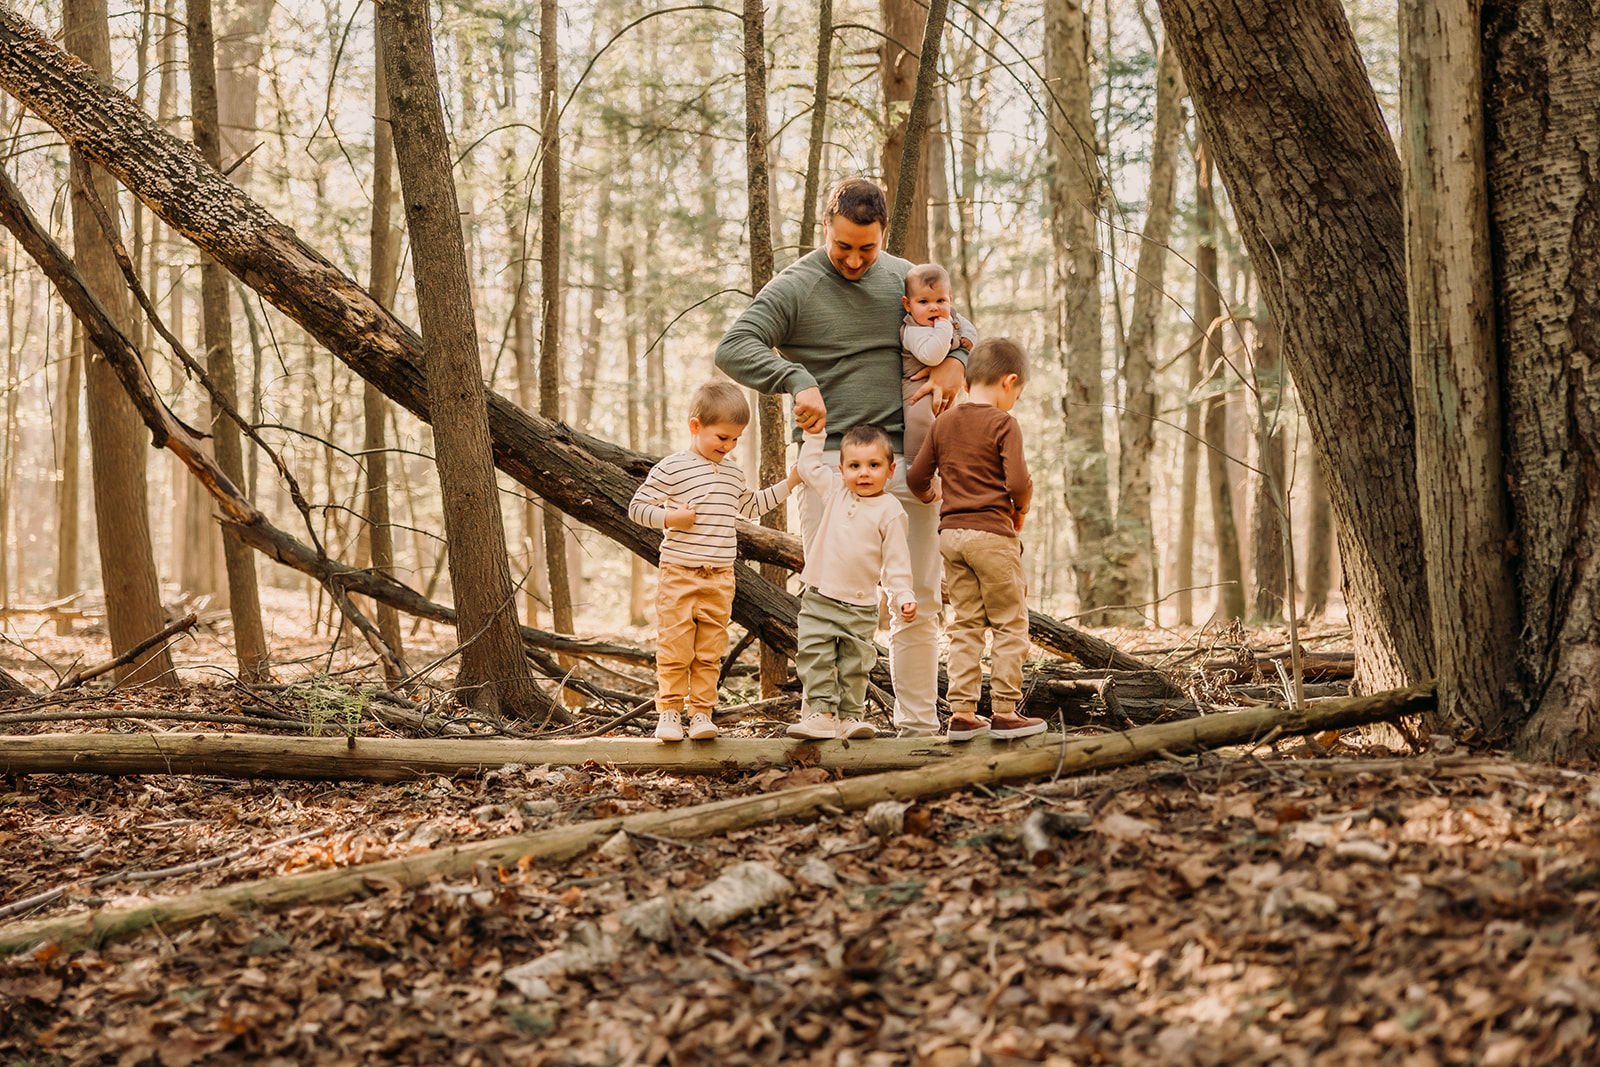 Joyful family immersed in the tranquility of the Ottawa Forest